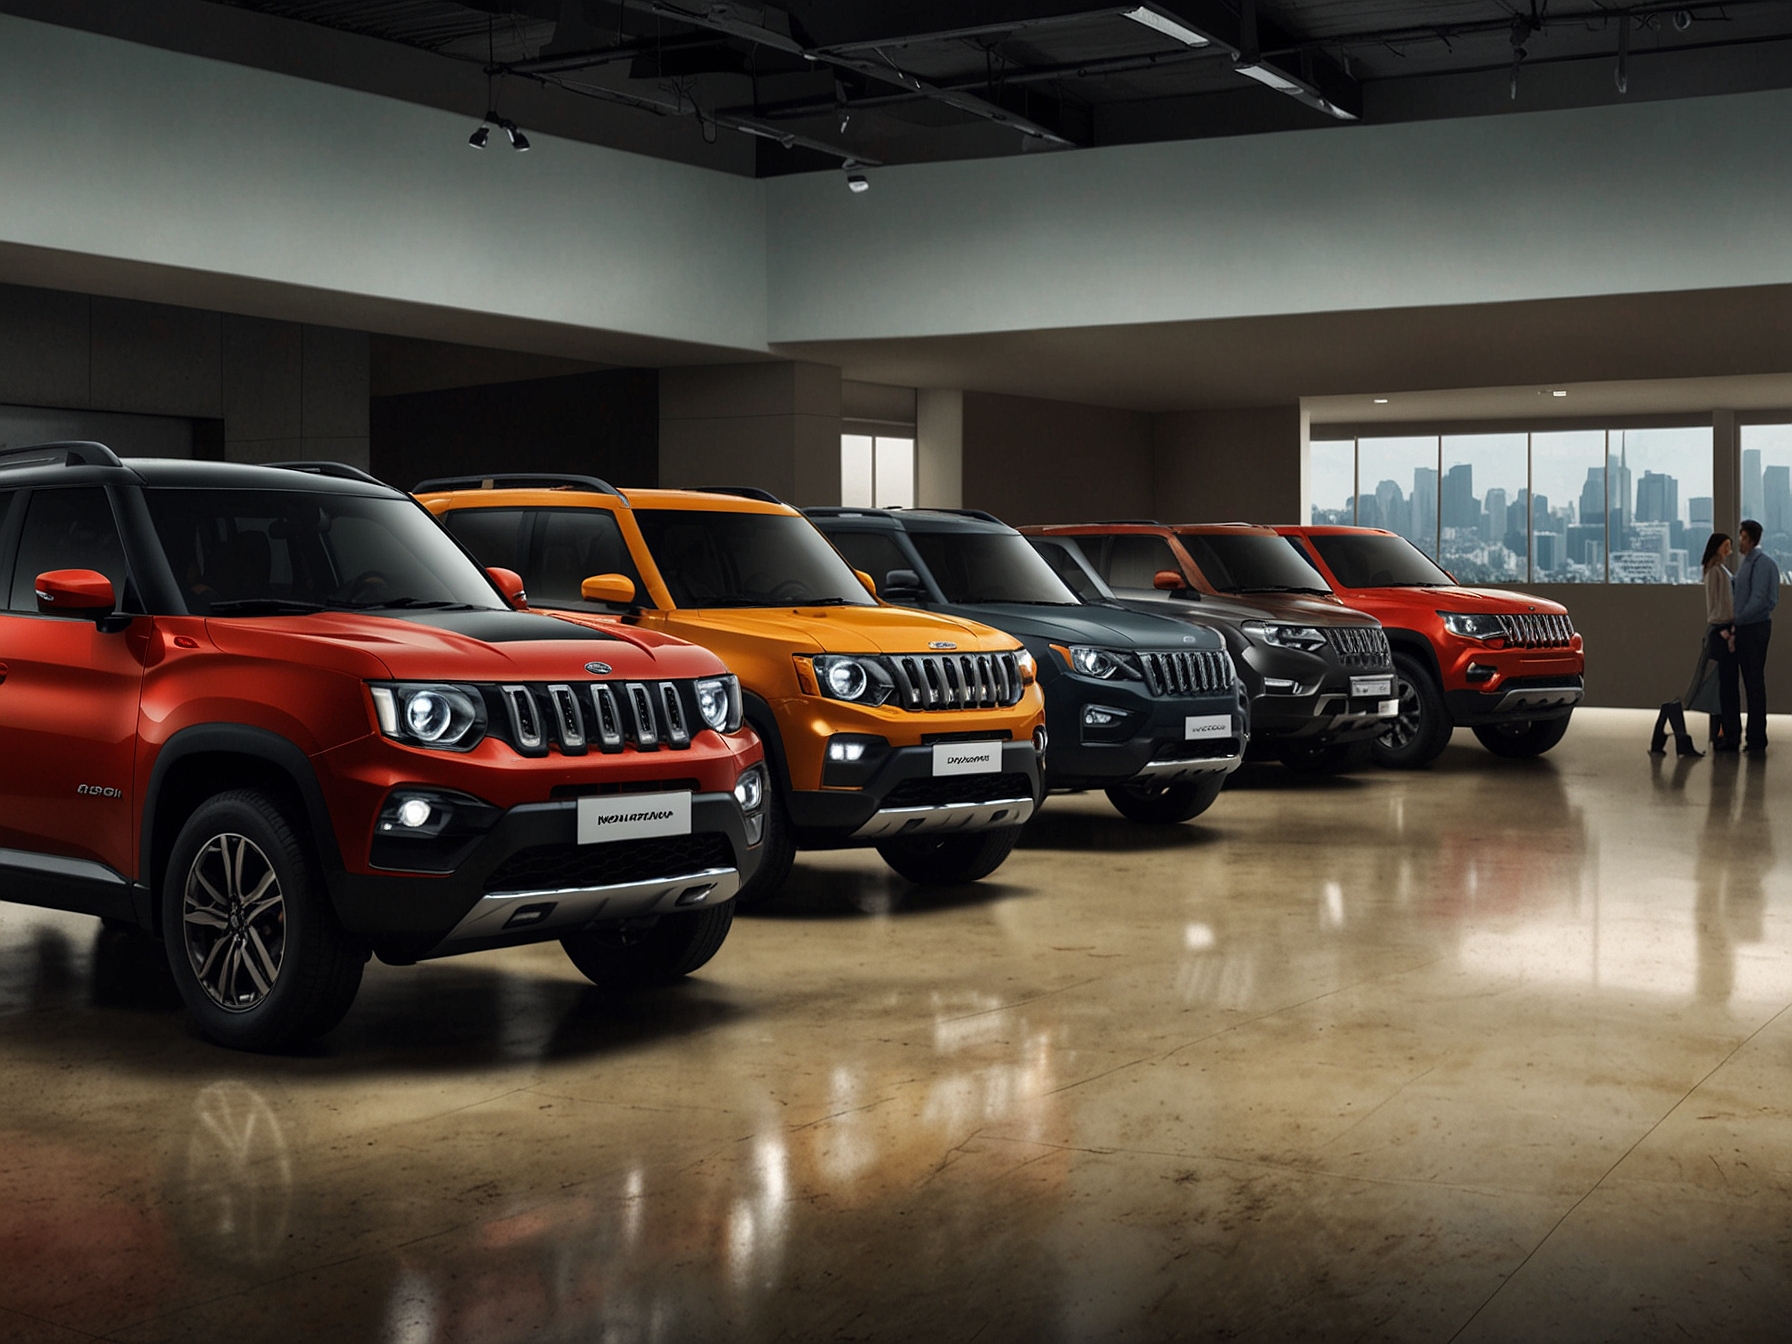 A lineup of Mahindra's popular models, including the Mahindra Thar, XUV300, and XUV700, displayed at a showroom, highlighting the company's successful vehicle range.